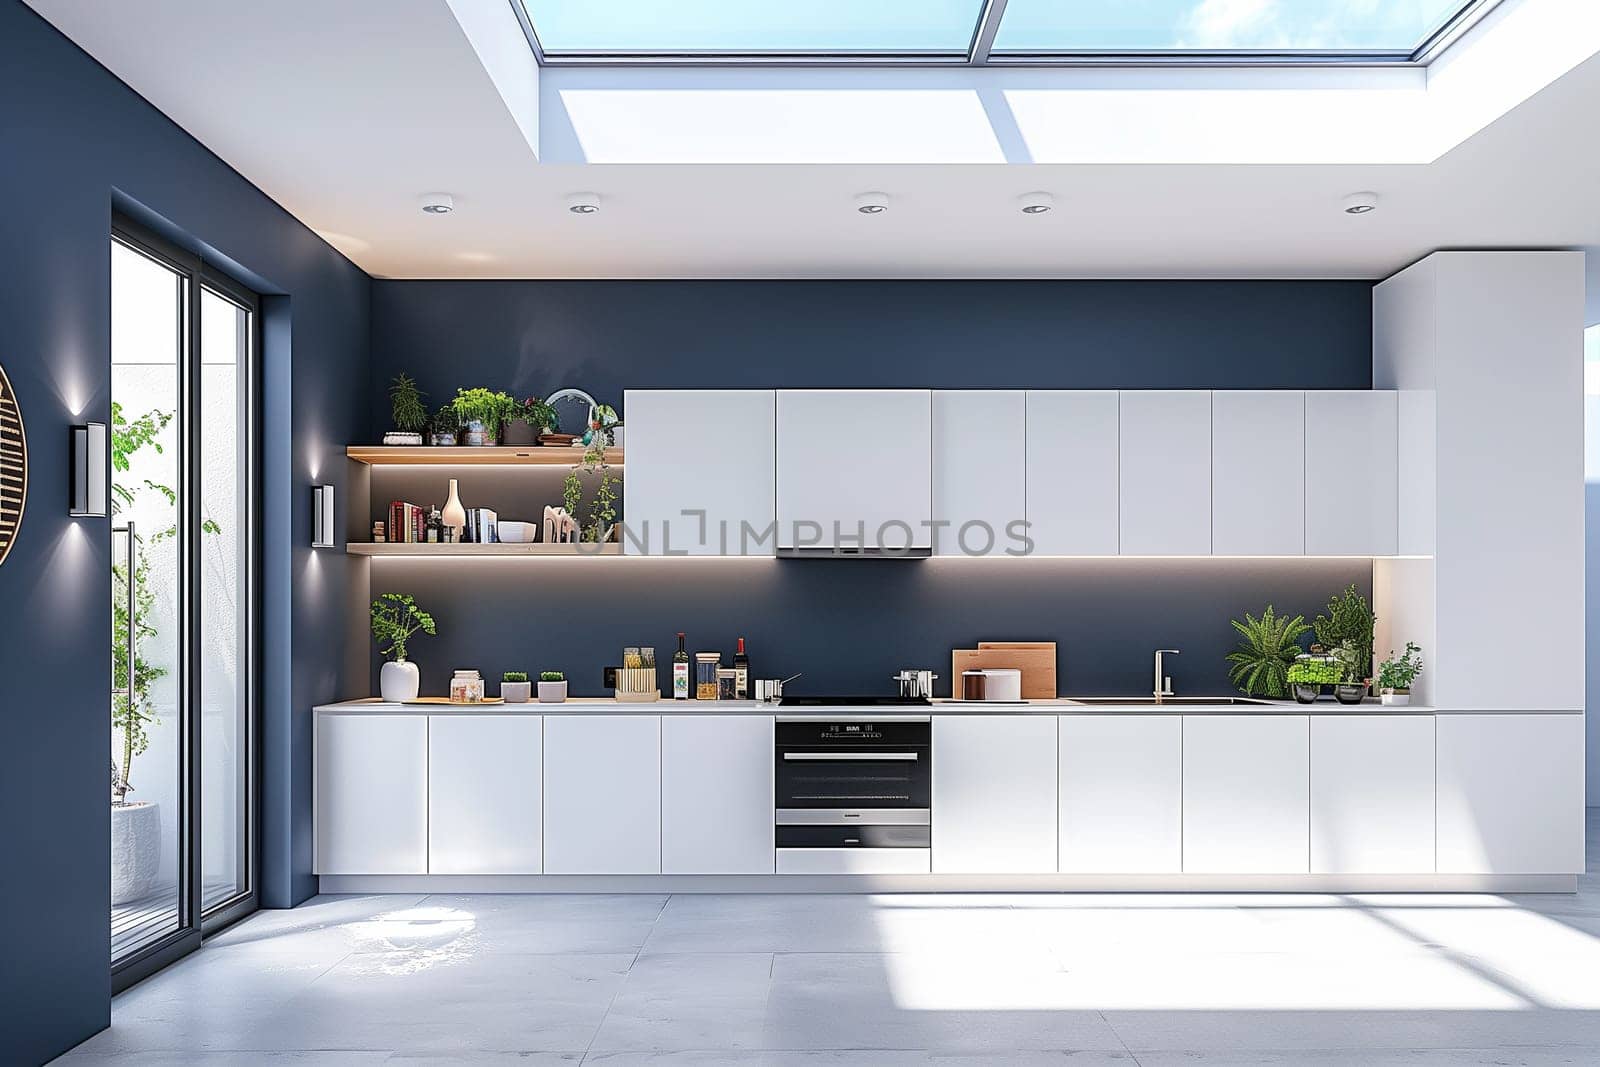 A kitchen flooded with natural light from a skylight above, illuminating countertops and appliances.